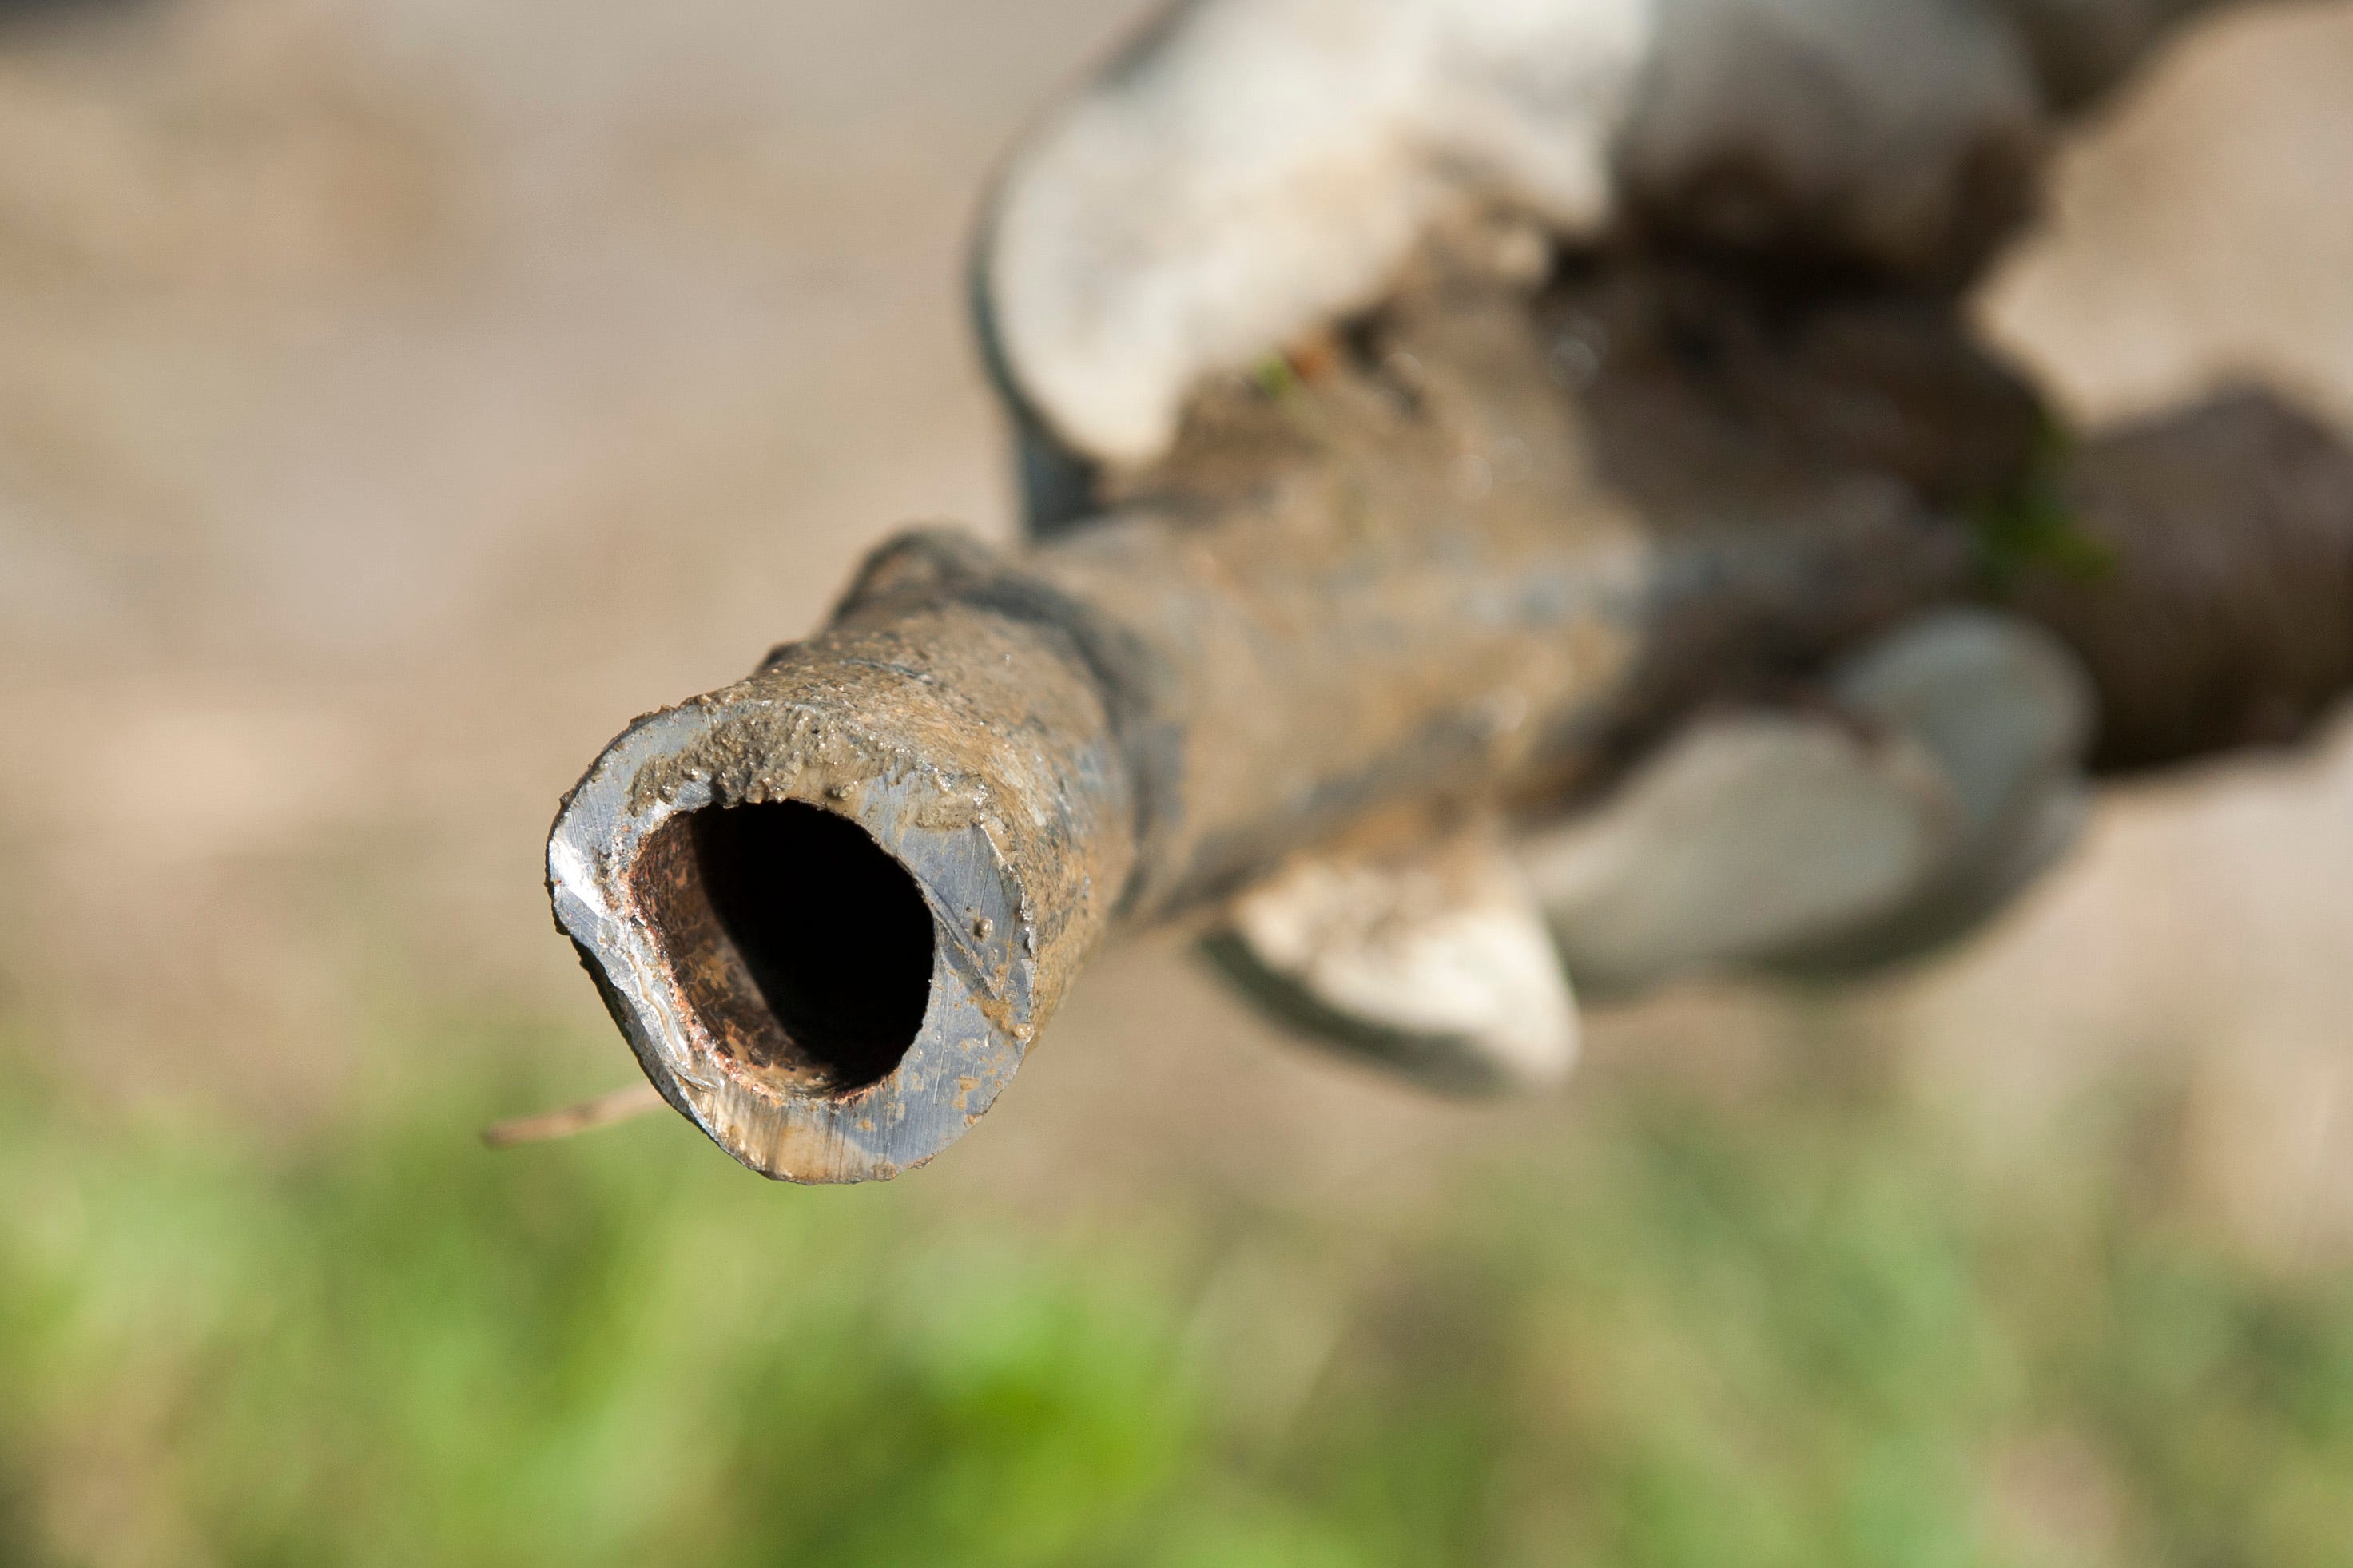 A section of lead pipe that was removed by crews replacing lead-tainted service lines at homes on the 1200 block of Durand in Flint, August 31, 2016